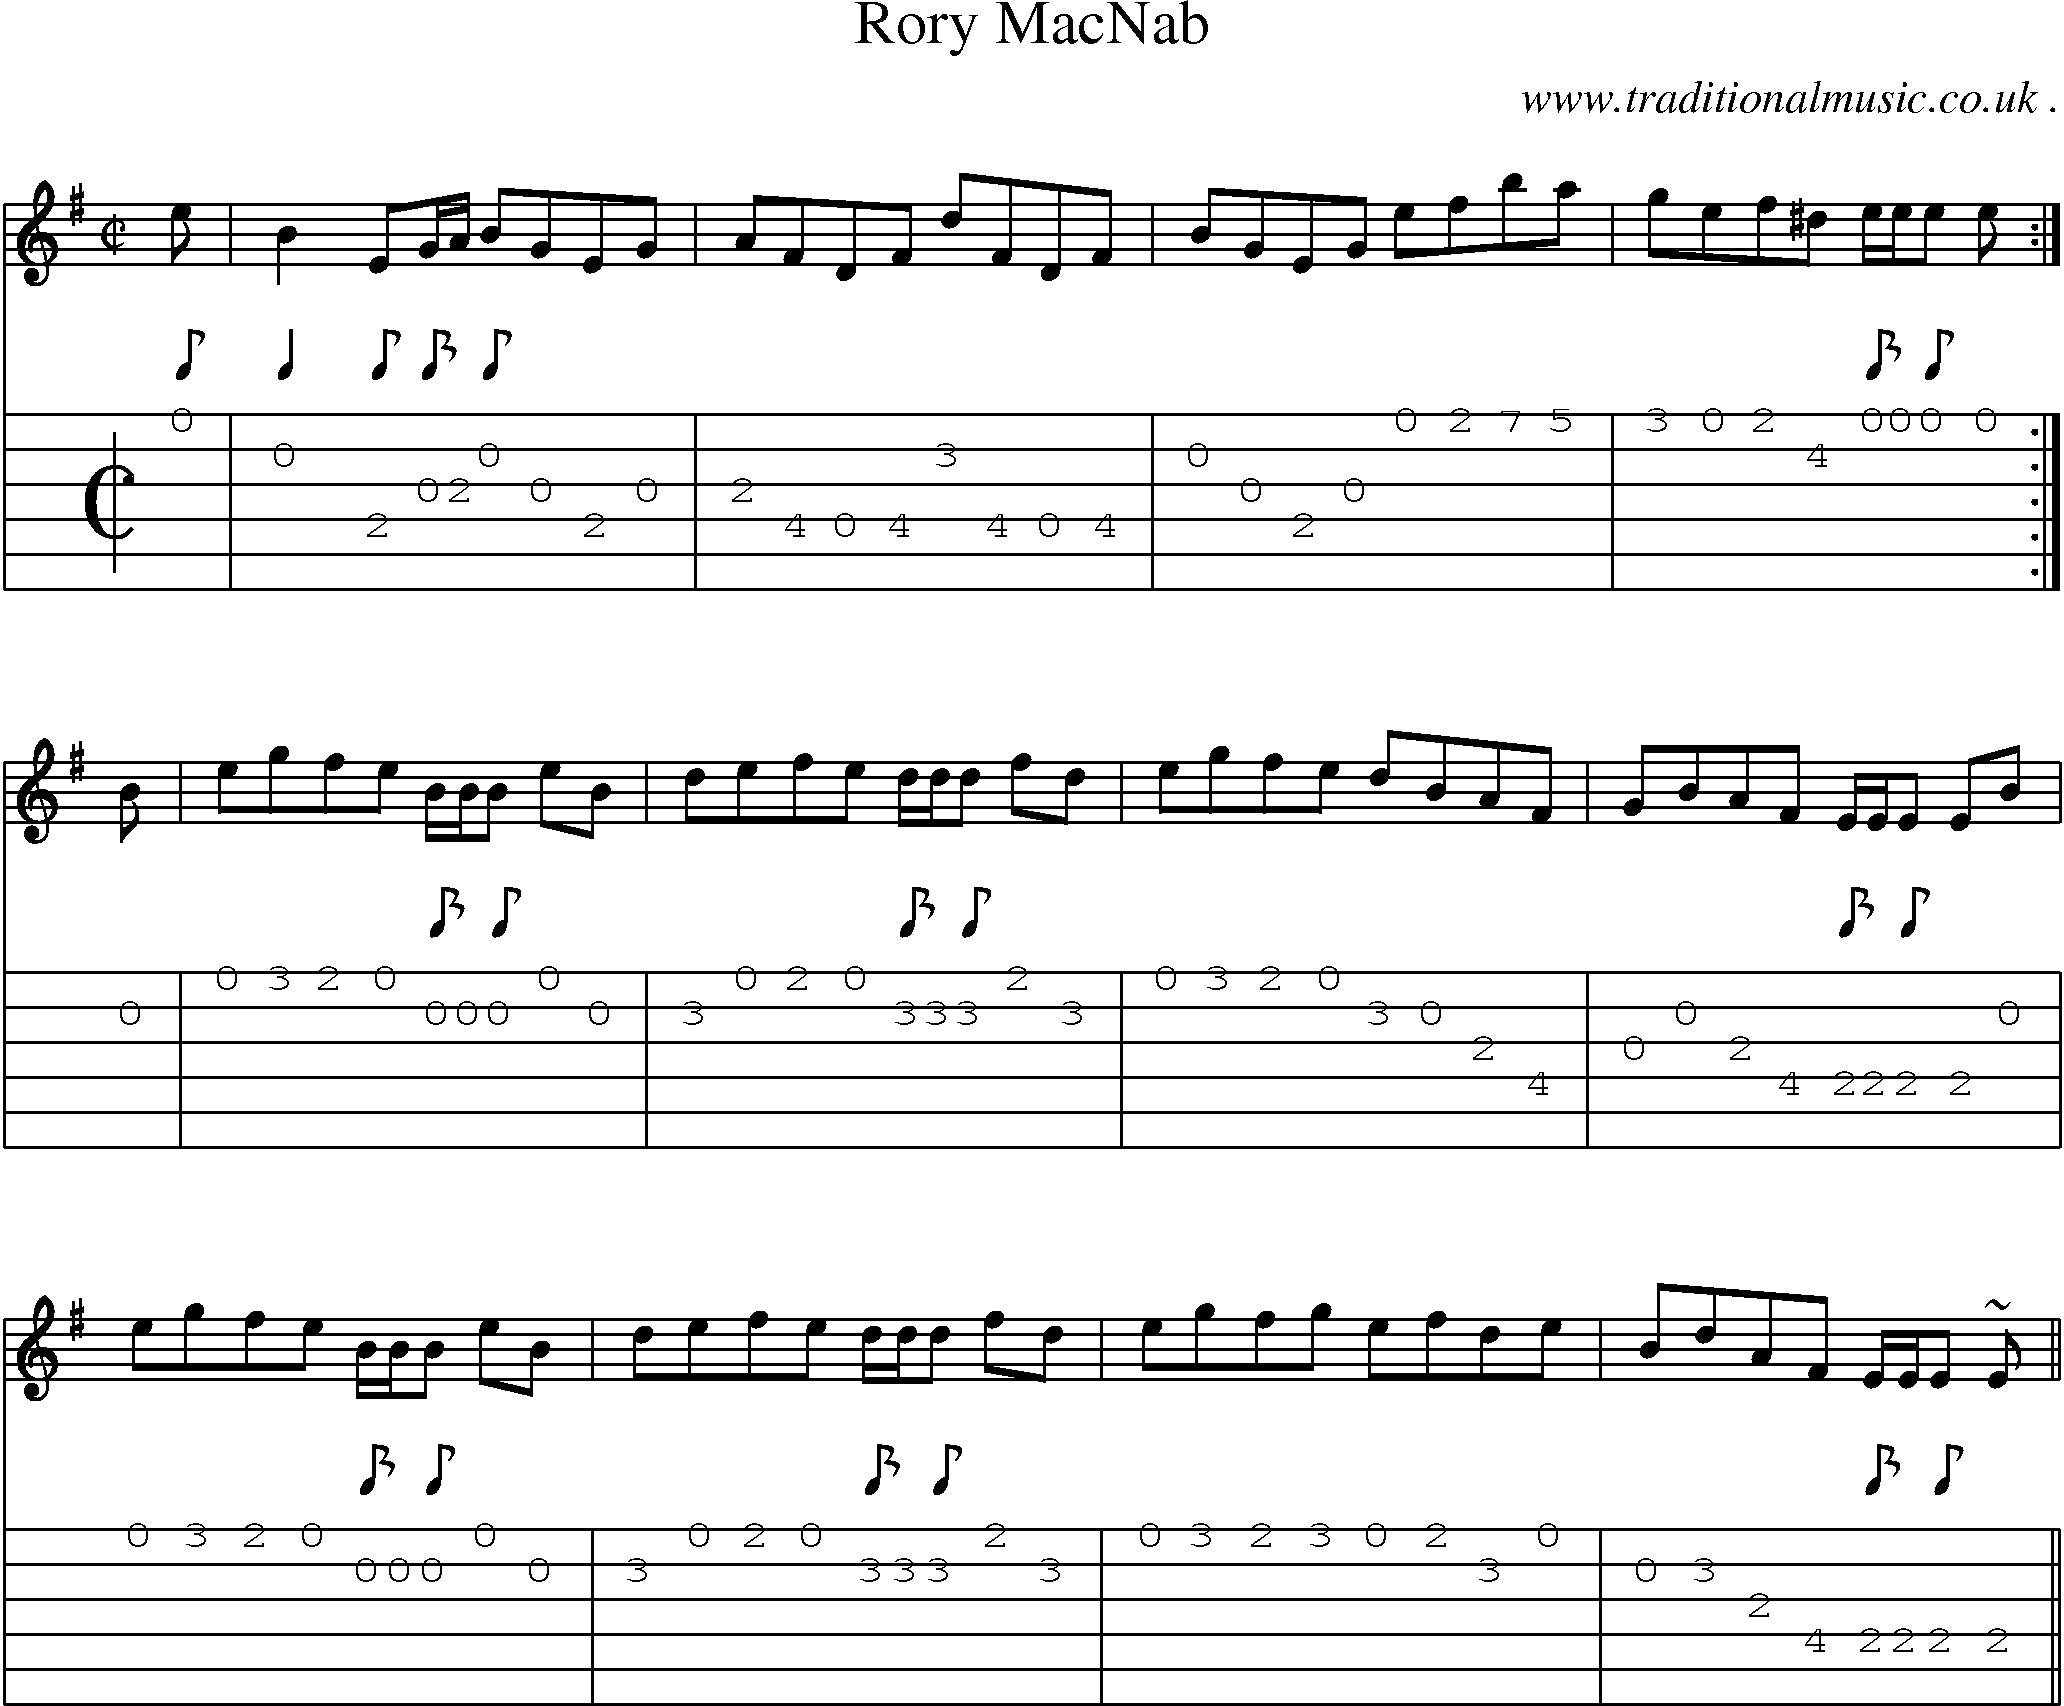 Sheet-music  score, Chords and Guitar Tabs for Rory Macnab